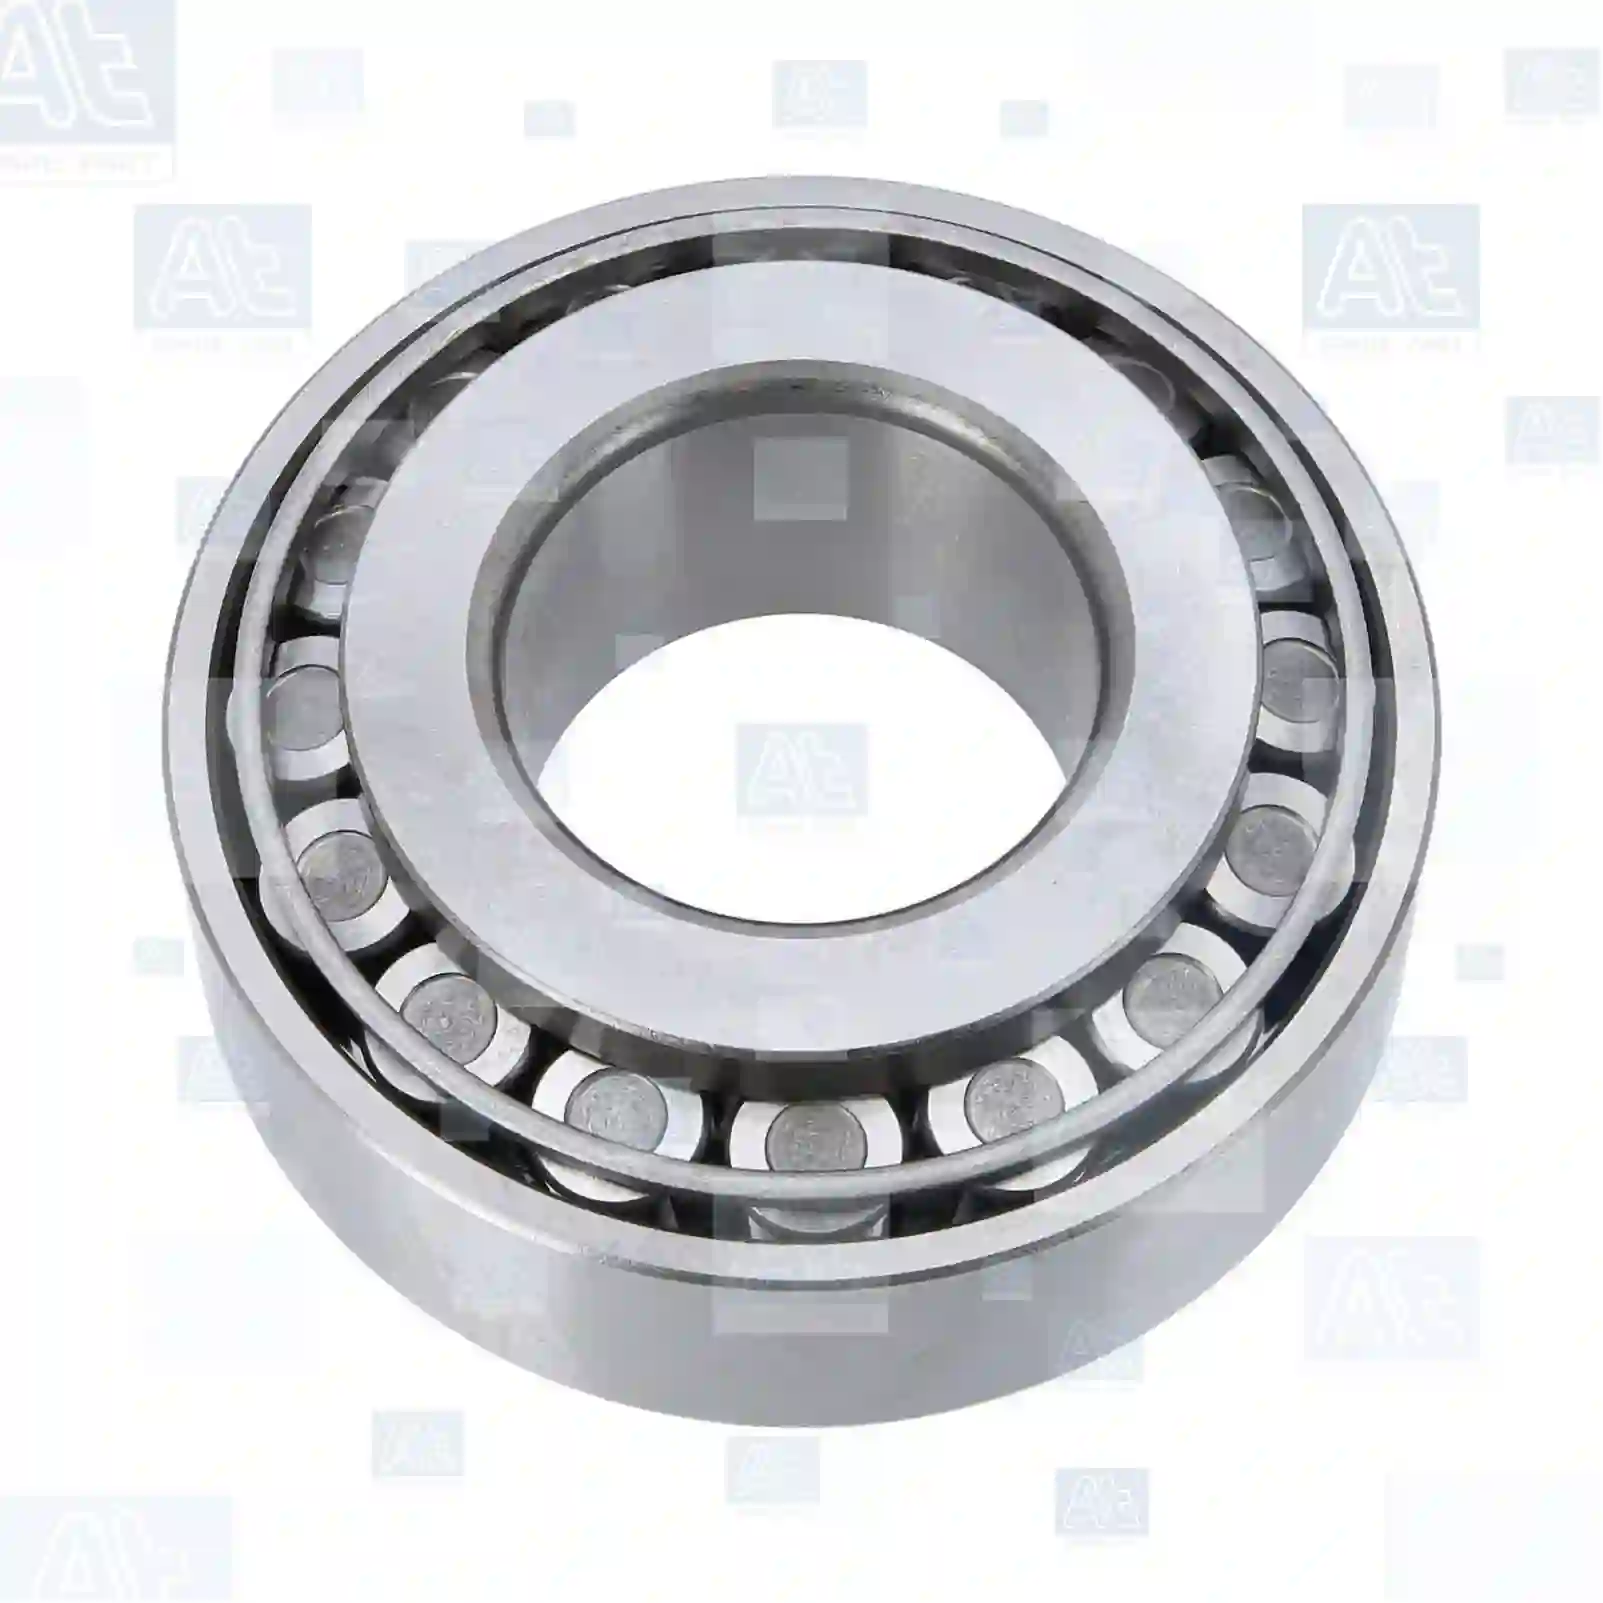 Tapered roller bearing, 77725193, 0275828, 275823, 275828, 01110020, 26800610, 988450103, 988450103A, 988450129, 988450129A, 26800610, 3612965000, 06324990017, 0009812005, 0069810805, 0069816905, 0069817405, 0109819305, 0345386000, 38326-90000, 0023432311, 0959532310, 0959532311, 5000022267, 4200003200, 14764, 178427, 179427, 11095, 183338, ZG02973-0008 ||  77725193 At Spare Part | Engine, Accelerator Pedal, Camshaft, Connecting Rod, Crankcase, Crankshaft, Cylinder Head, Engine Suspension Mountings, Exhaust Manifold, Exhaust Gas Recirculation, Filter Kits, Flywheel Housing, General Overhaul Kits, Engine, Intake Manifold, Oil Cleaner, Oil Cooler, Oil Filter, Oil Pump, Oil Sump, Piston & Liner, Sensor & Switch, Timing Case, Turbocharger, Cooling System, Belt Tensioner, Coolant Filter, Coolant Pipe, Corrosion Prevention Agent, Drive, Expansion Tank, Fan, Intercooler, Monitors & Gauges, Radiator, Thermostat, V-Belt / Timing belt, Water Pump, Fuel System, Electronical Injector Unit, Feed Pump, Fuel Filter, cpl., Fuel Gauge Sender,  Fuel Line, Fuel Pump, Fuel Tank, Injection Line Kit, Injection Pump, Exhaust System, Clutch & Pedal, Gearbox, Propeller Shaft, Axles, Brake System, Hubs & Wheels, Suspension, Leaf Spring, Universal Parts / Accessories, Steering, Electrical System, Cabin Tapered roller bearing, 77725193, 0275828, 275823, 275828, 01110020, 26800610, 988450103, 988450103A, 988450129, 988450129A, 26800610, 3612965000, 06324990017, 0009812005, 0069810805, 0069816905, 0069817405, 0109819305, 0345386000, 38326-90000, 0023432311, 0959532310, 0959532311, 5000022267, 4200003200, 14764, 178427, 179427, 11095, 183338, ZG02973-0008 ||  77725193 At Spare Part | Engine, Accelerator Pedal, Camshaft, Connecting Rod, Crankcase, Crankshaft, Cylinder Head, Engine Suspension Mountings, Exhaust Manifold, Exhaust Gas Recirculation, Filter Kits, Flywheel Housing, General Overhaul Kits, Engine, Intake Manifold, Oil Cleaner, Oil Cooler, Oil Filter, Oil Pump, Oil Sump, Piston & Liner, Sensor & Switch, Timing Case, Turbocharger, Cooling System, Belt Tensioner, Coolant Filter, Coolant Pipe, Corrosion Prevention Agent, Drive, Expansion Tank, Fan, Intercooler, Monitors & Gauges, Radiator, Thermostat, V-Belt / Timing belt, Water Pump, Fuel System, Electronical Injector Unit, Feed Pump, Fuel Filter, cpl., Fuel Gauge Sender,  Fuel Line, Fuel Pump, Fuel Tank, Injection Line Kit, Injection Pump, Exhaust System, Clutch & Pedal, Gearbox, Propeller Shaft, Axles, Brake System, Hubs & Wheels, Suspension, Leaf Spring, Universal Parts / Accessories, Steering, Electrical System, Cabin